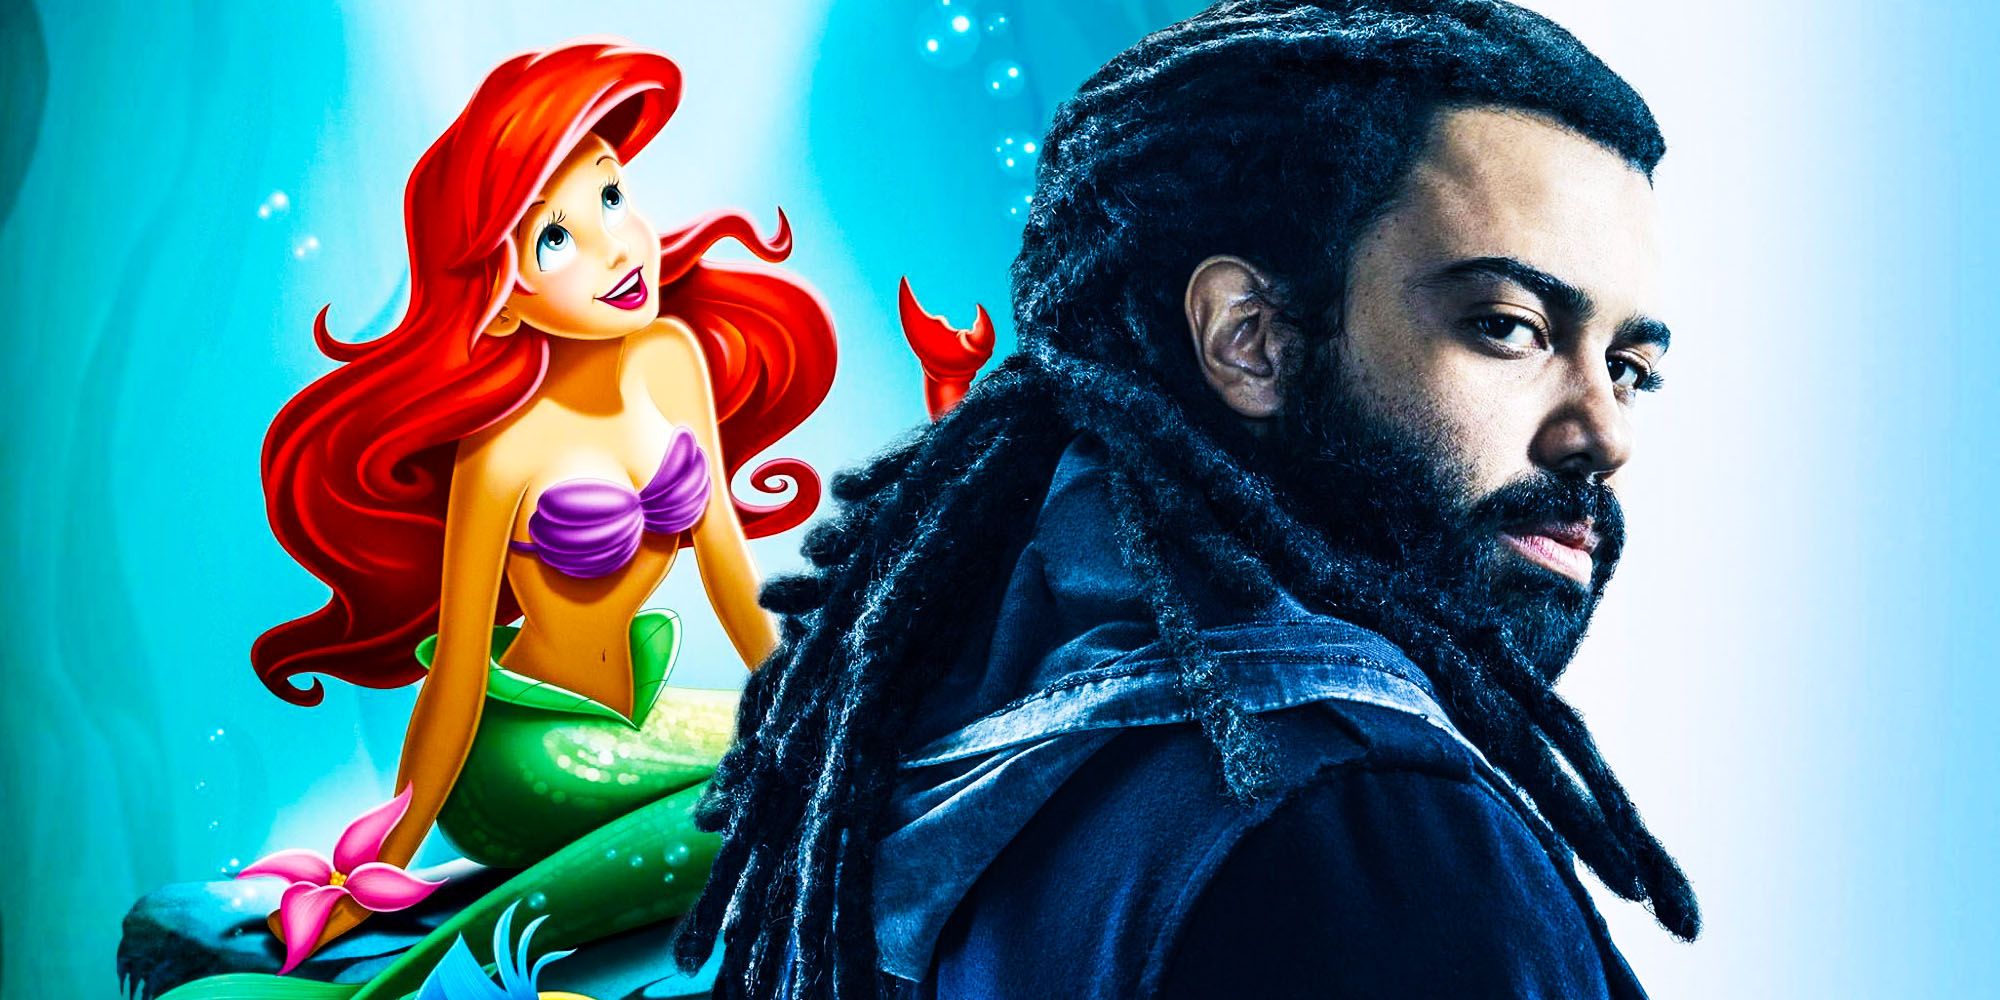 Daveed Diggs The little mermaid